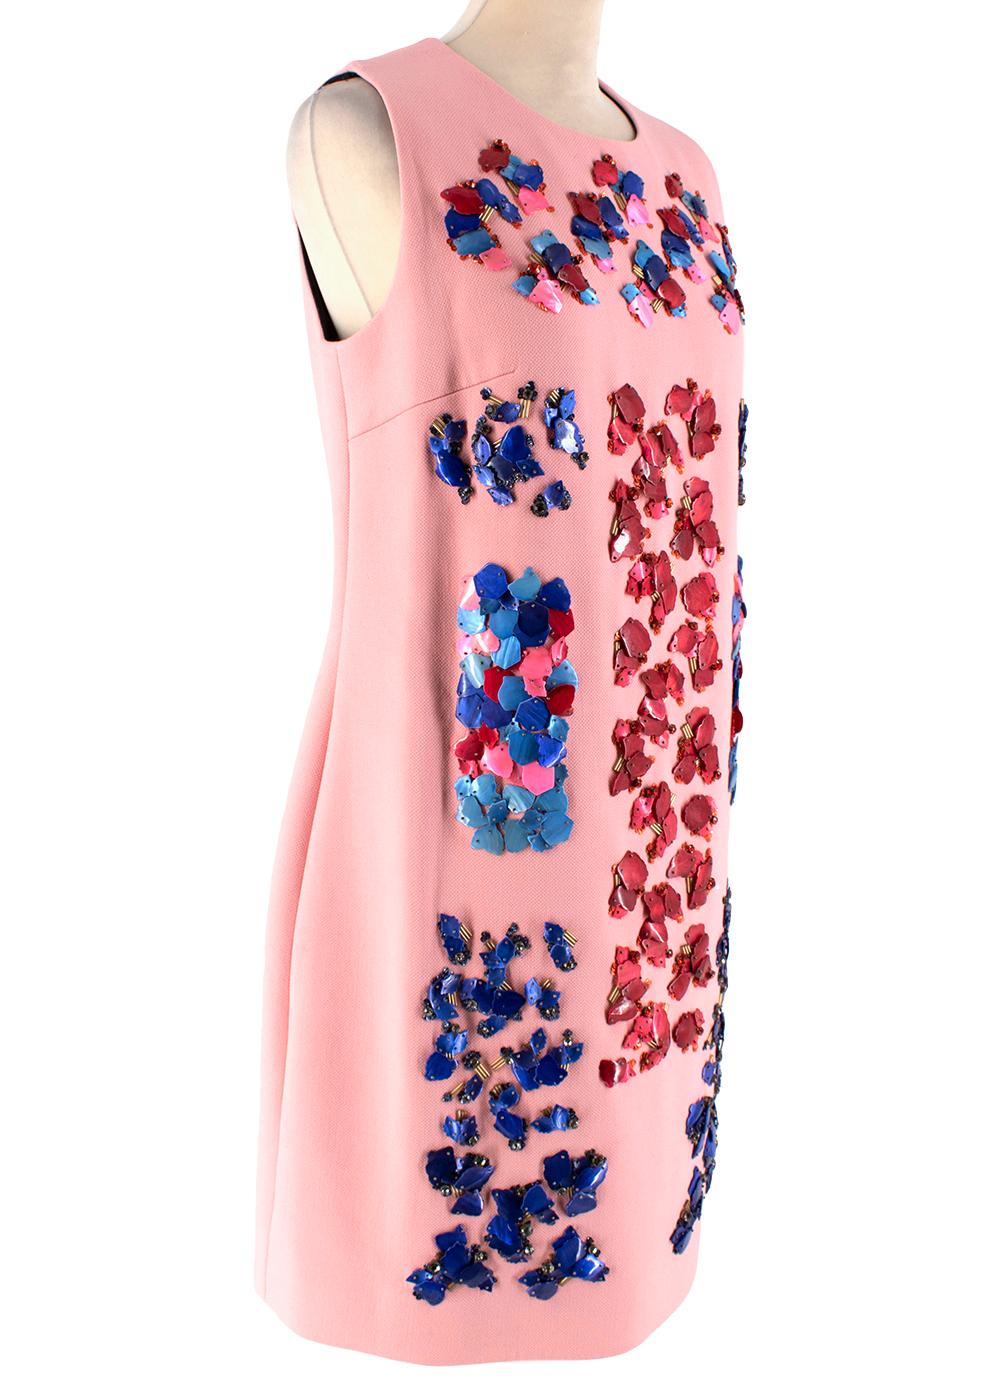 Peter Pilotto Pink Embellished Sleeveless Dress

Light pink Peter Pilotto wool crepe dress
mother of pearl style embellishments throughout, 
crew neck 
concealed zip closure at centre back
Cut for a slightly loose fit
Mid-weight, non-stretchy